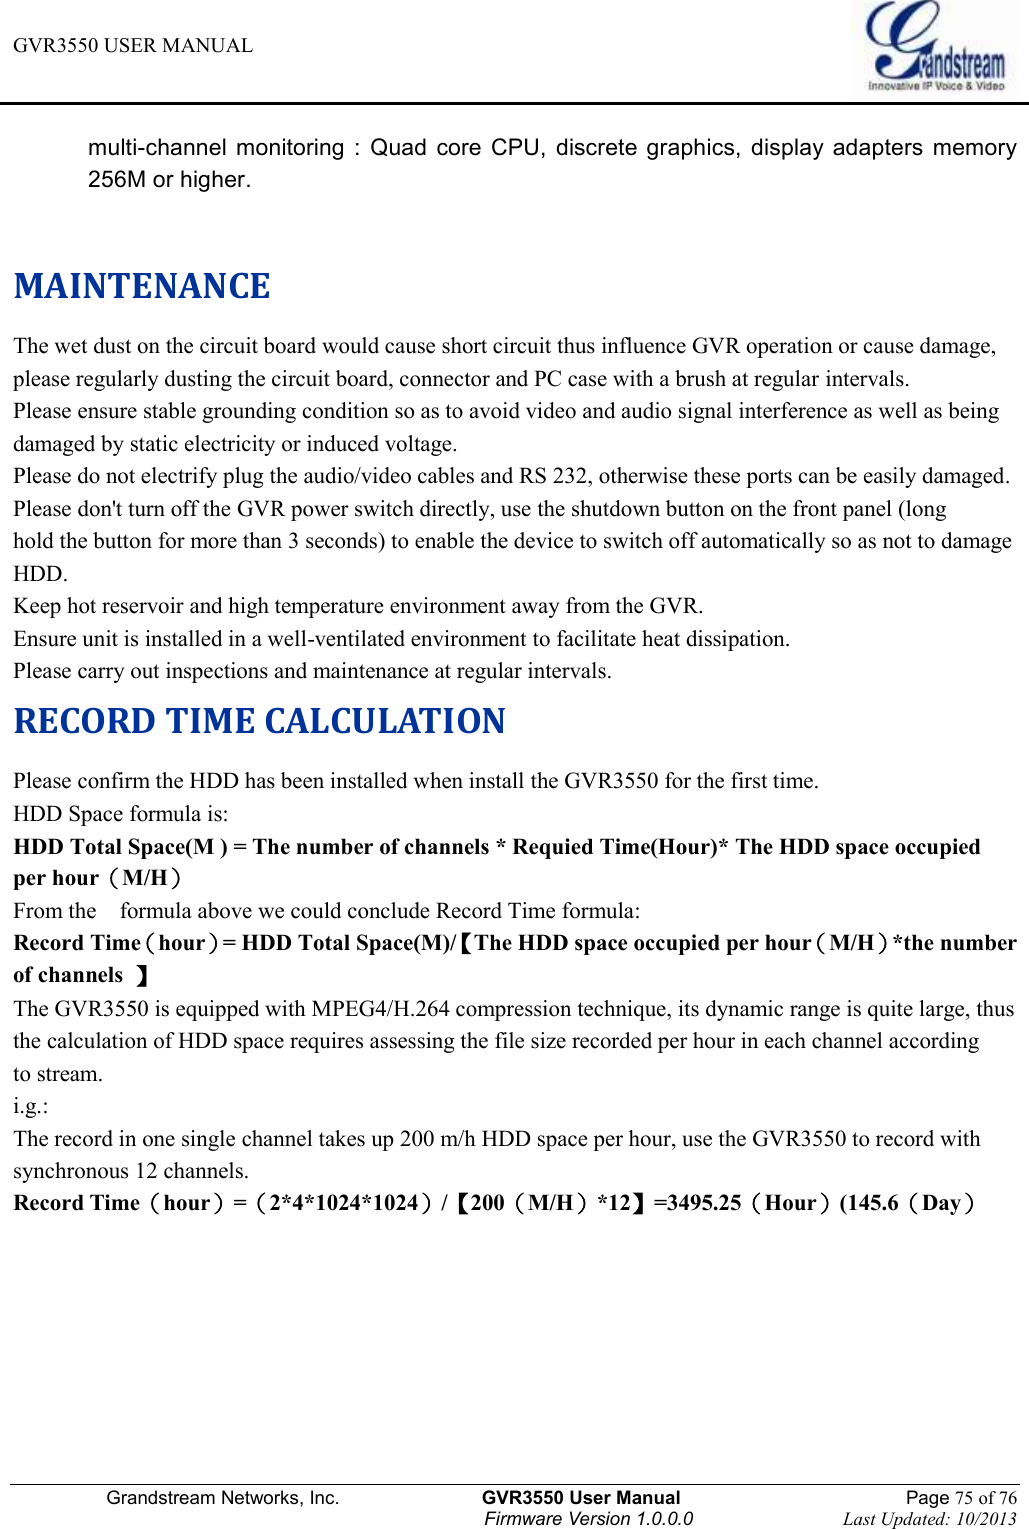 GVR3550 USER MANUAL   Grandstream Networks, Inc.                    GVR3550 User Manual                                                Page 75 of 76 Firmware Version 1.0.0.0                                Last Updated: 10/2013  multi-channel  monitoring :  Quad  core  CPU,  discrete graphics,  display adapters memory 256M or higher.  MAINTENANCE The wet dust on the circuit board would cause short circuit thus influence GVR operation or cause damage, please regularly dusting the circuit board, connector and PC case with a brush at regular intervals. Please ensure stable grounding condition so as to avoid video and audio signal interference as well as being damaged by static electricity or induced voltage. Please do not electrify plug the audio/video cables and RS 232, otherwise these ports can be easily damaged. Please don&apos;t turn off the GVR power switch directly, use the shutdown button on the front panel (long hold the button for more than 3 seconds) to enable the device to switch off automatically so as not to damage HDD. Keep hot reservoir and high temperature environment away from the GVR.   Ensure unit is installed in a well-ventilated environment to facilitate heat dissipation.   Please carry out inspections and maintenance at regular intervals. RECORD TIME CALCULATION Please confirm the HDD has been installed when install the GVR3550 for the first time. HDD Space formula is: HDD Total Space(M ) = The number of channels * Requied Time(Hour)* The HDD space occupied per hour（M/H） From the    formula above we could conclude Record Time formula: Record Time（hour）= HDD Total Space(M)/【The HDD space occupied per hour（M/H）*the number of channels  】 The GVR3550 is equipped with MPEG4/H.264 compression technique, its dynamic range is quite large, thus the calculation of HDD space requires assessing the file size recorded per hour in each channel according to stream. i.g.: The record in one single channel takes up 200 m/h HDD space per hour, use the GVR3550 to record with synchronous 12 channels. Record Time（hour）=（2*4*1024*1024）/【200（M/H）*12】=3495.25（Hour）(145.6（Day）     